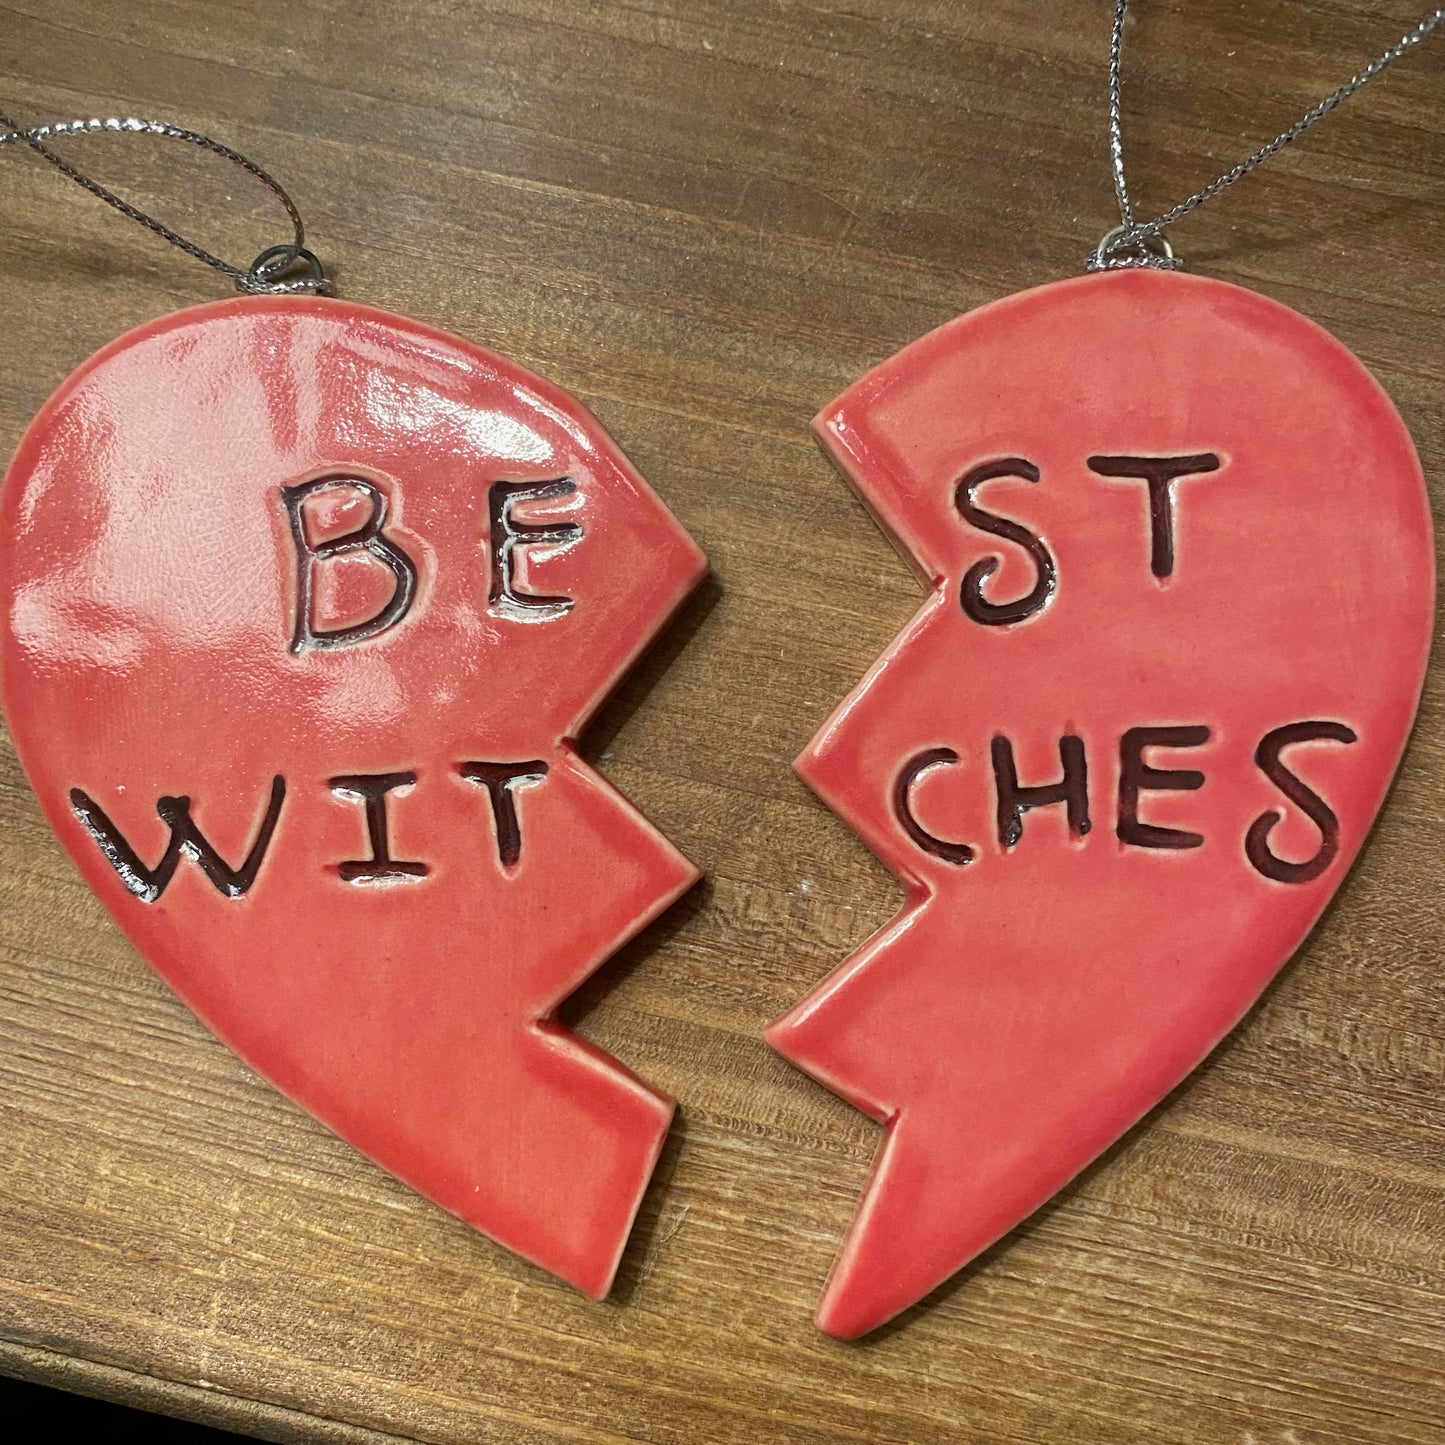 Ceramic Best Witches heart ornament set